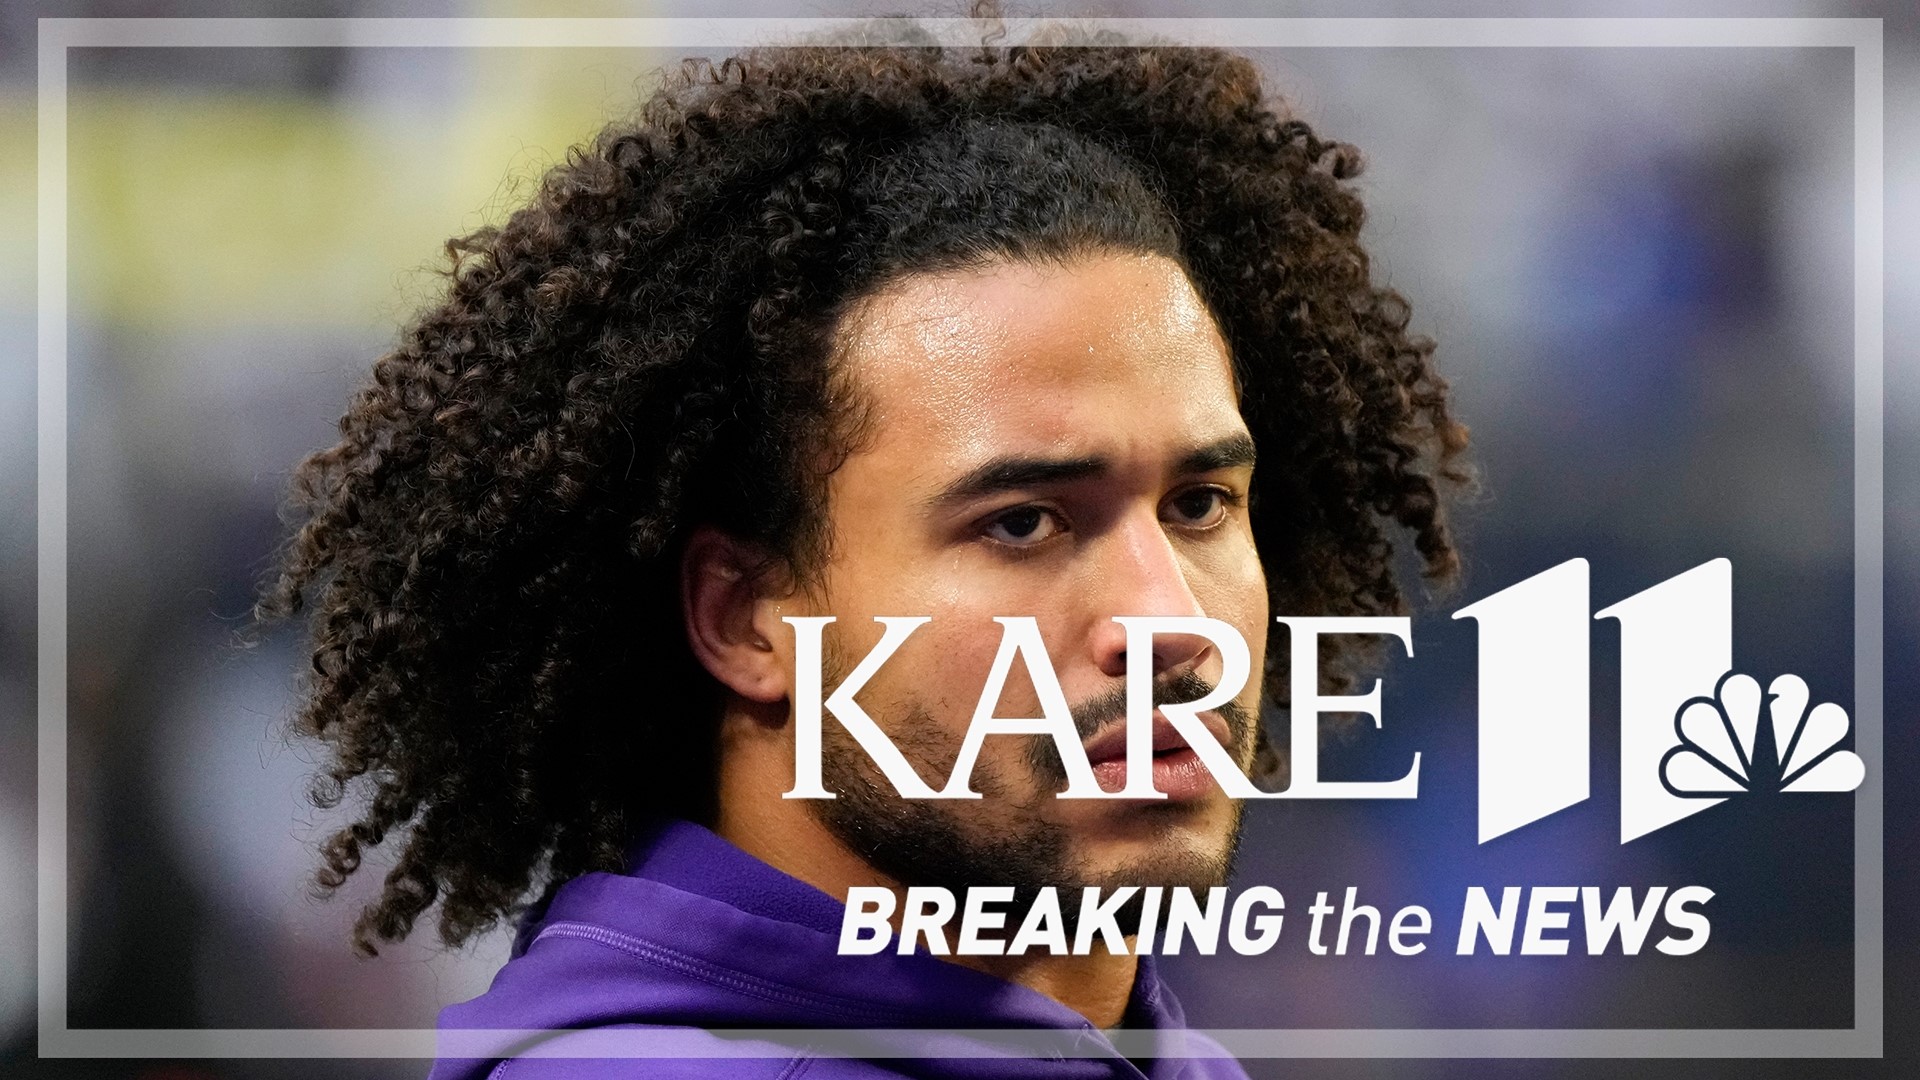 Eric Kendricks is known as a hard-hitting middle linebacker for the Vikings. He's also known in the Twin Cities as a philanthropist and community leader.